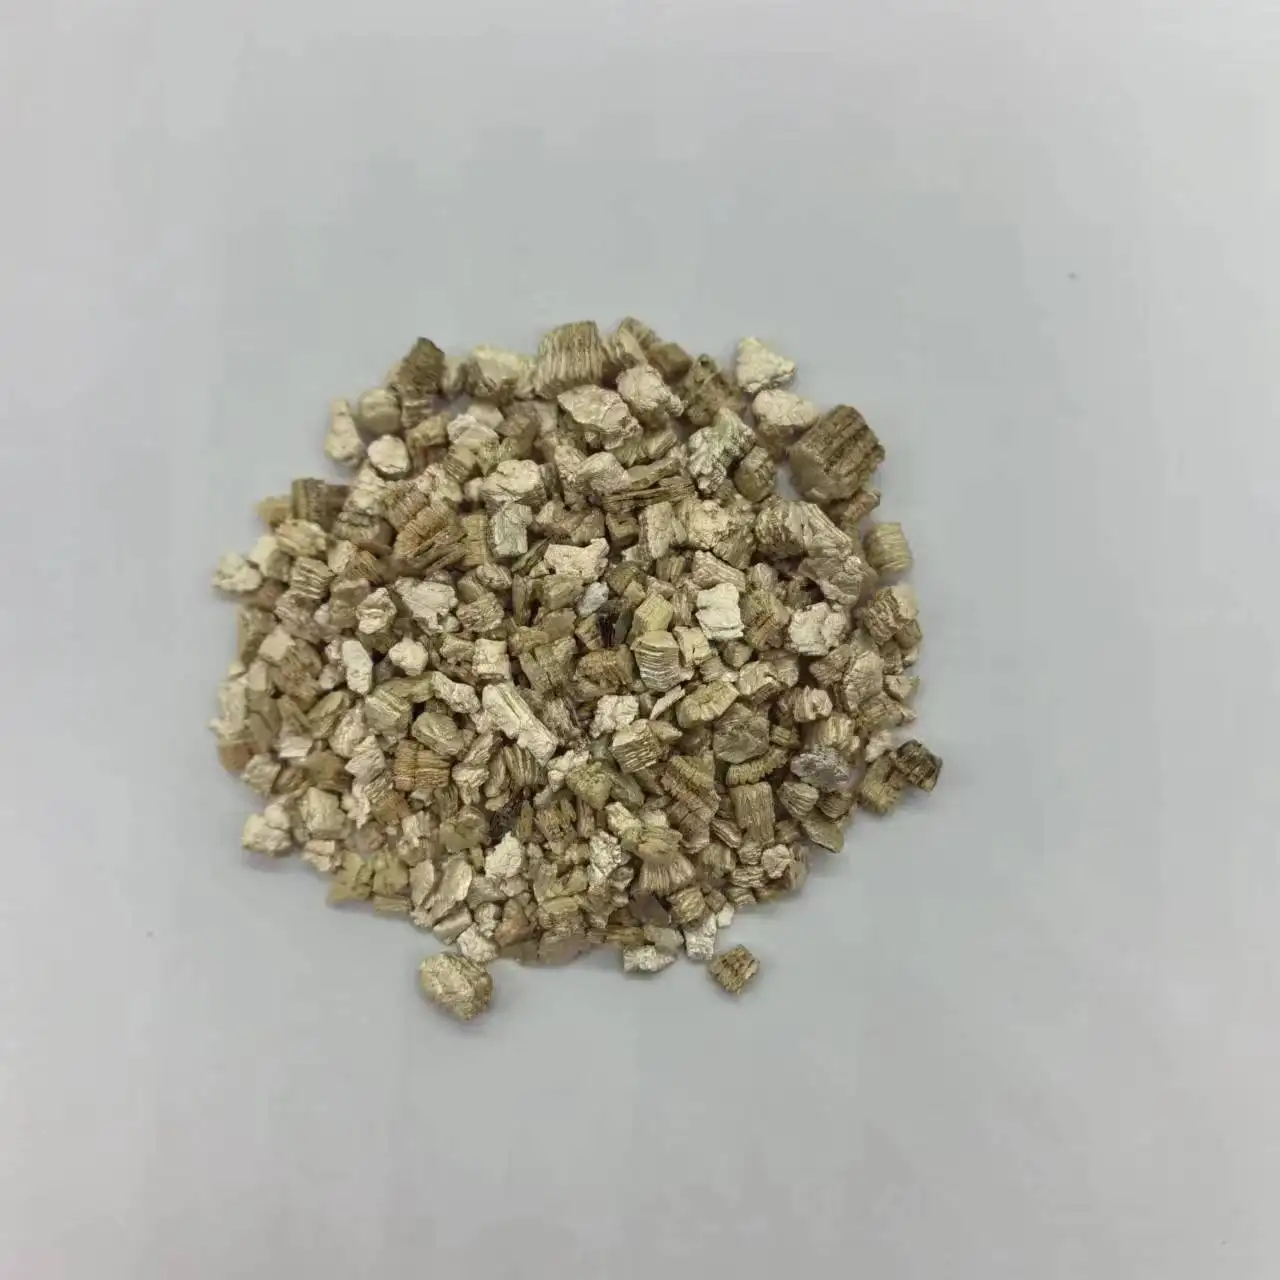 vermiculite for plants vermiculite price fine vermiculite powder used for horticultural soil improvement